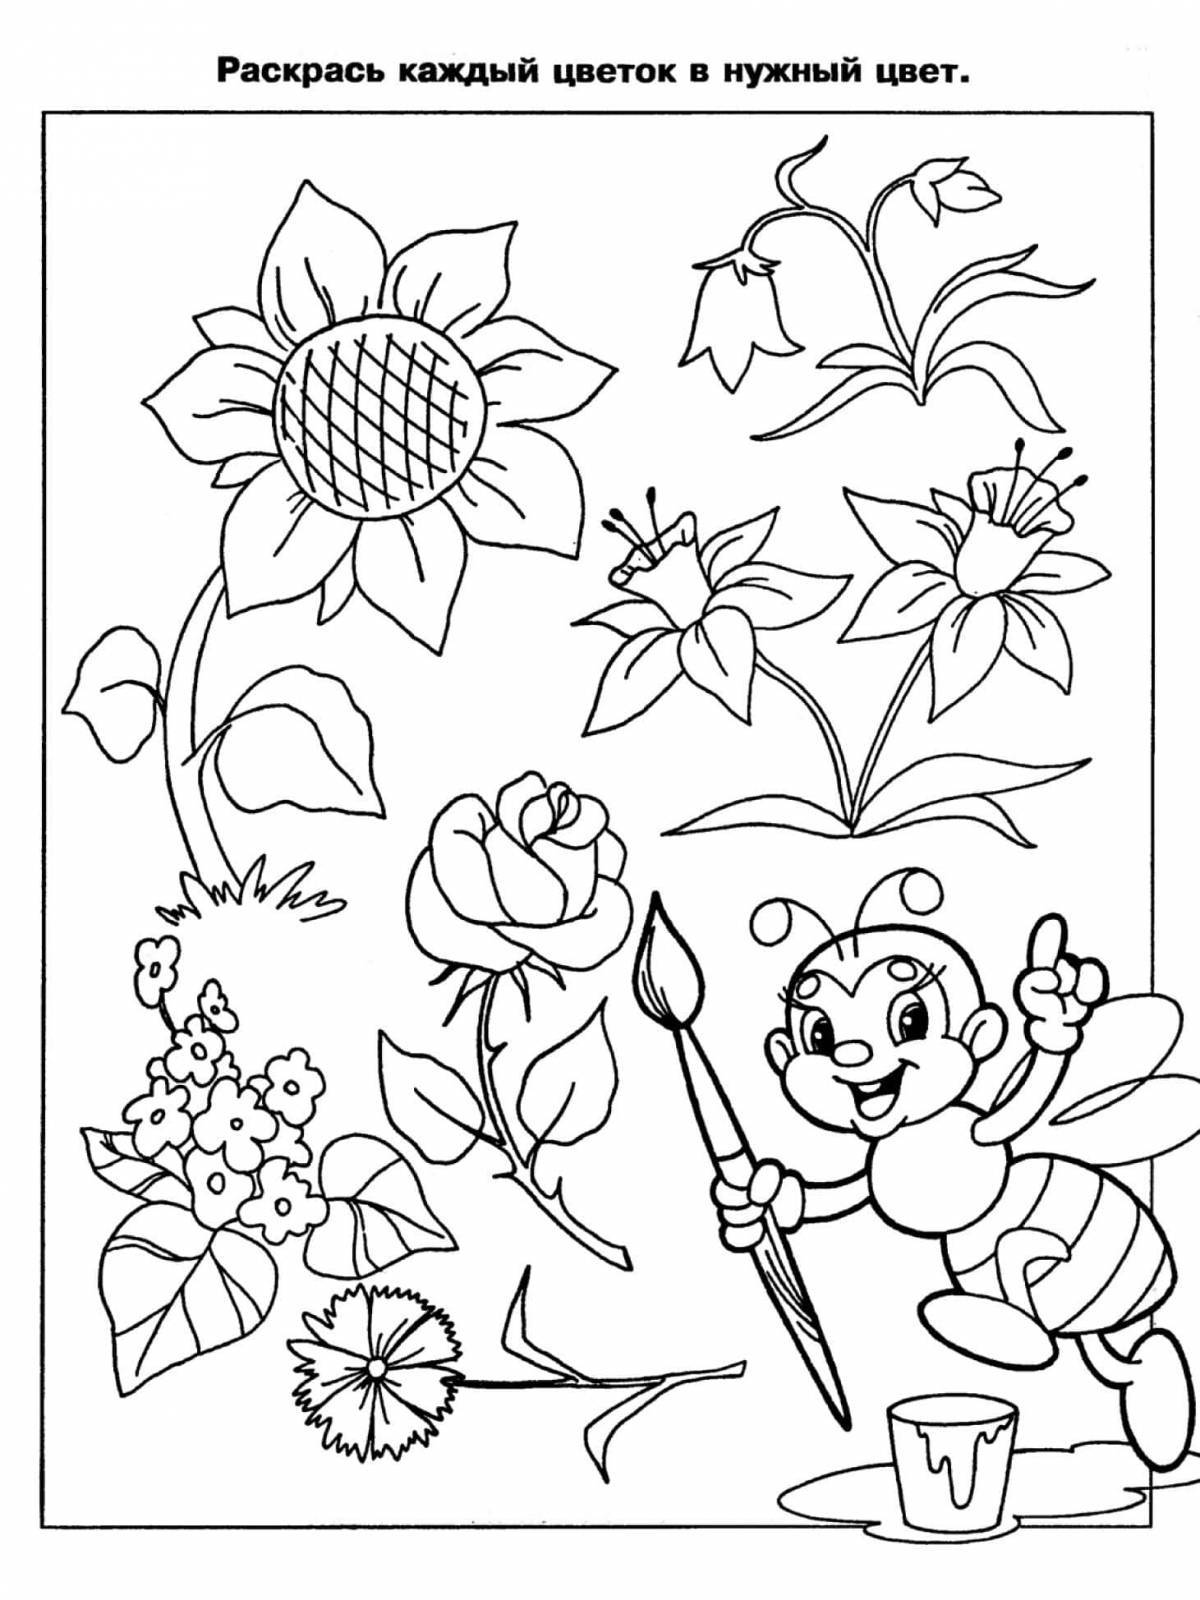 Colour coloring flowers for children 6-7 years old